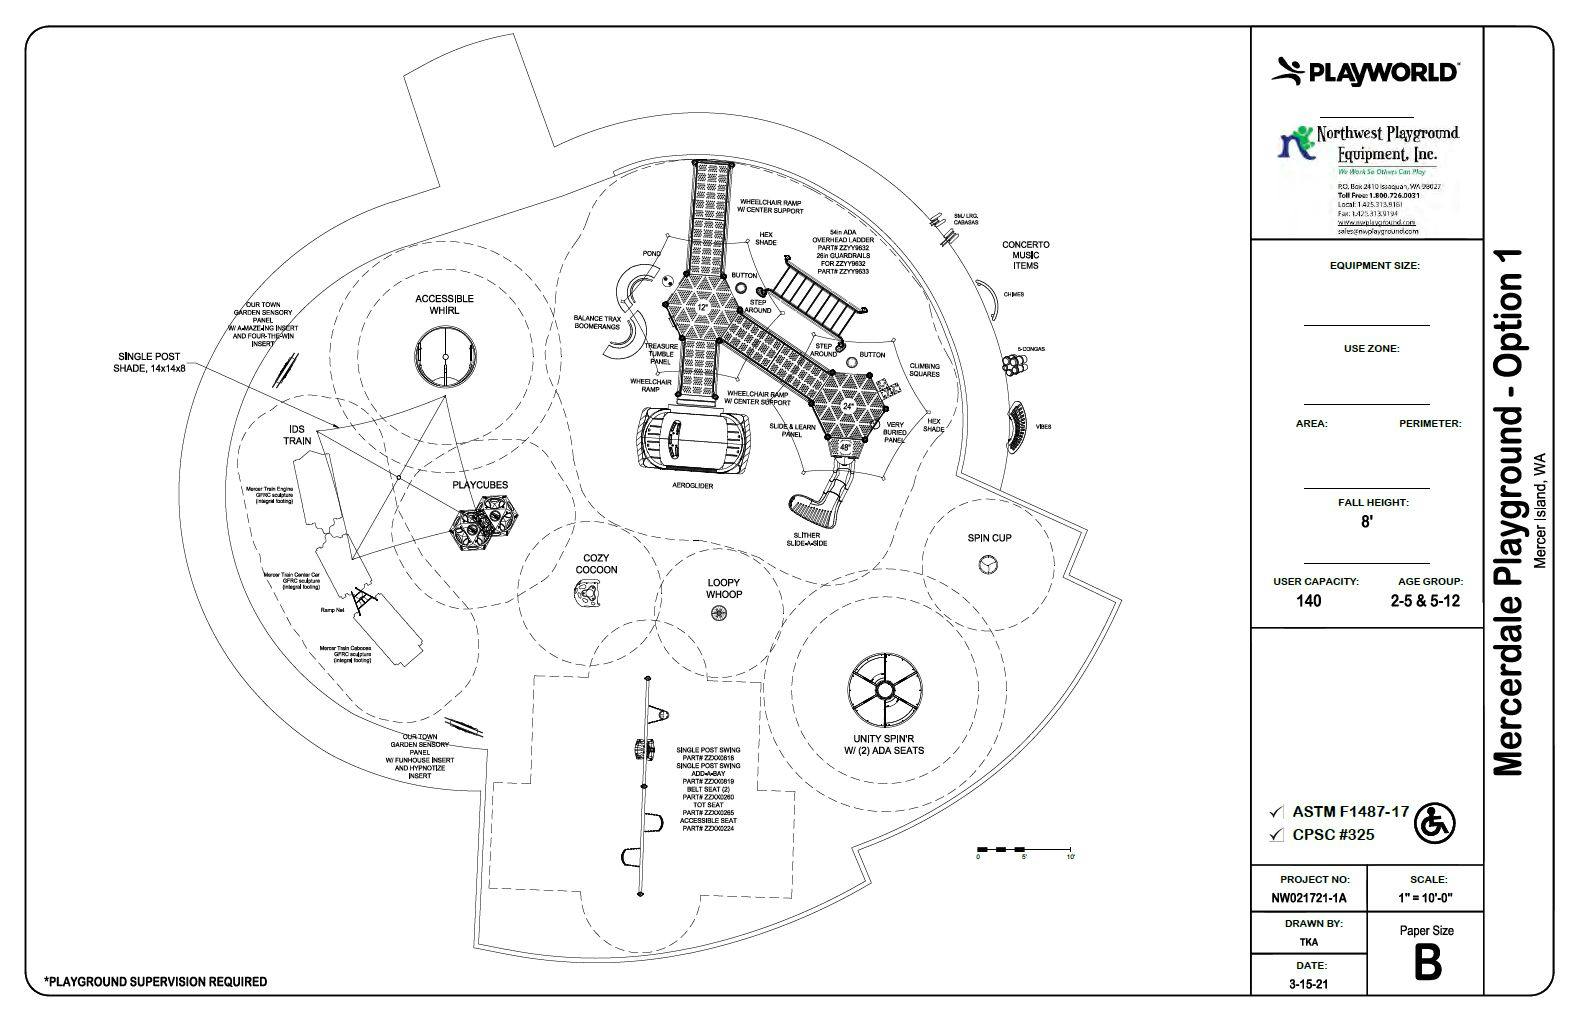 Proposed Playground Replacement - Blueprint